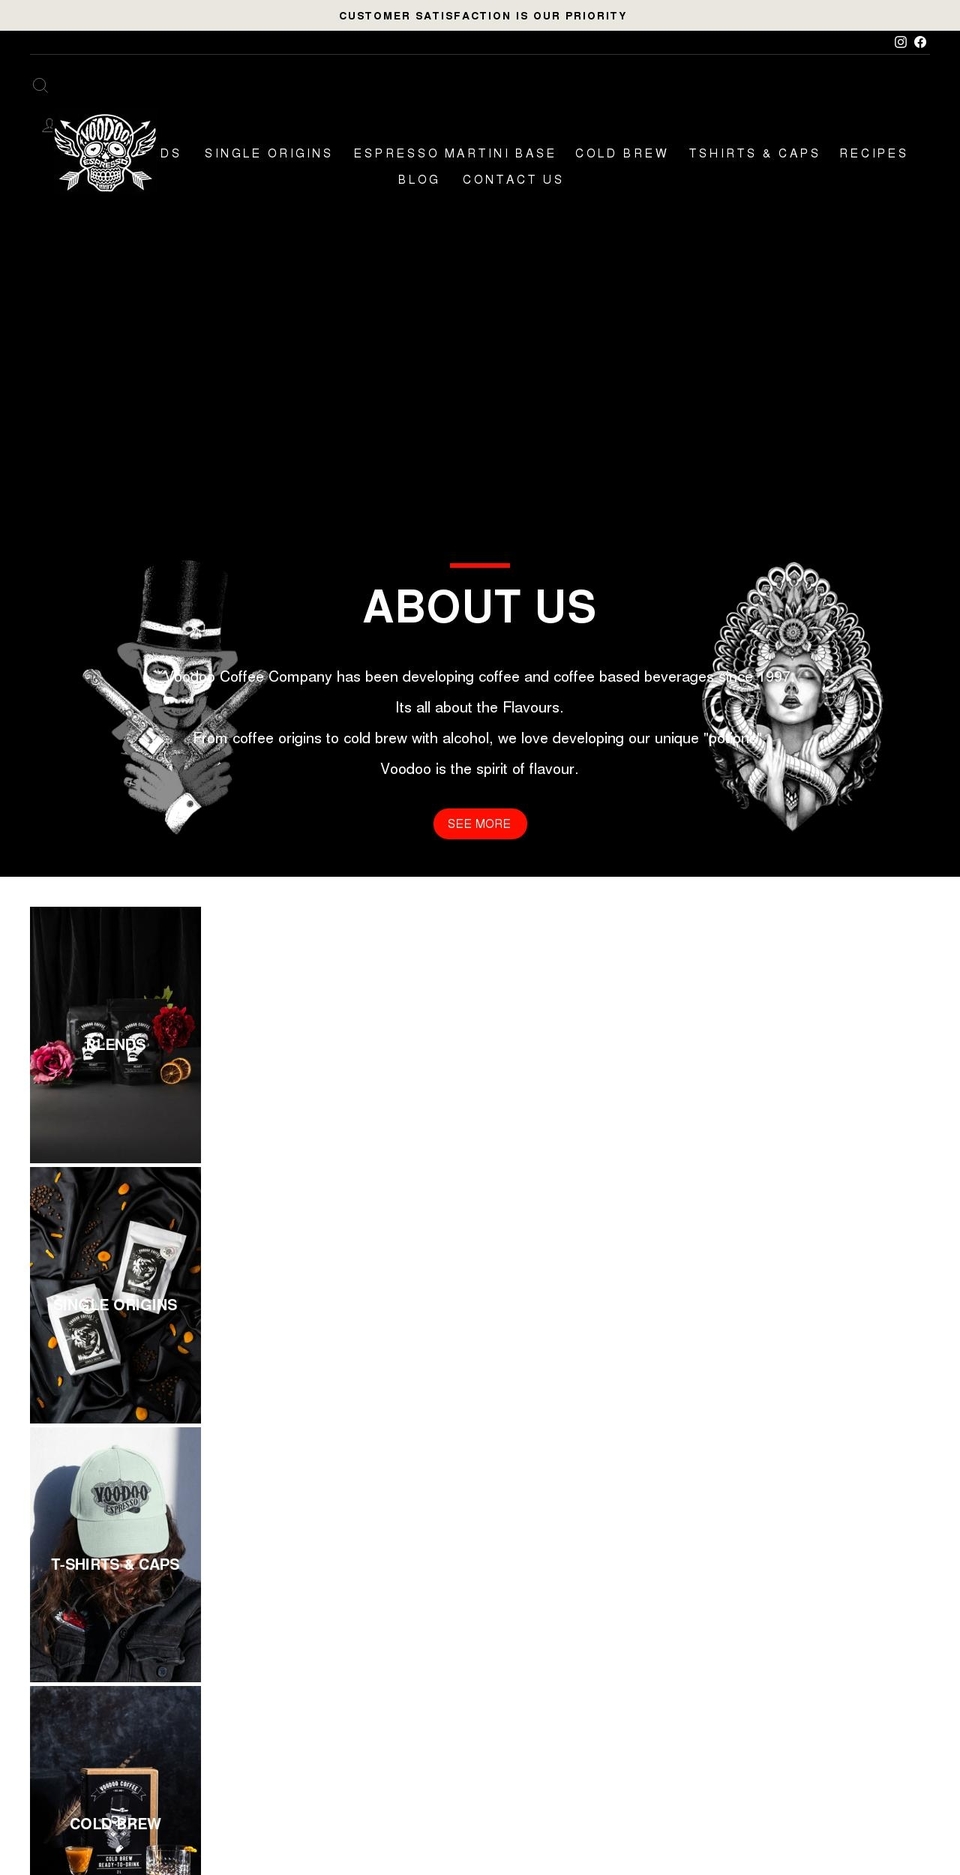 Coffee Shopify theme site example voodoocoffeeco.com